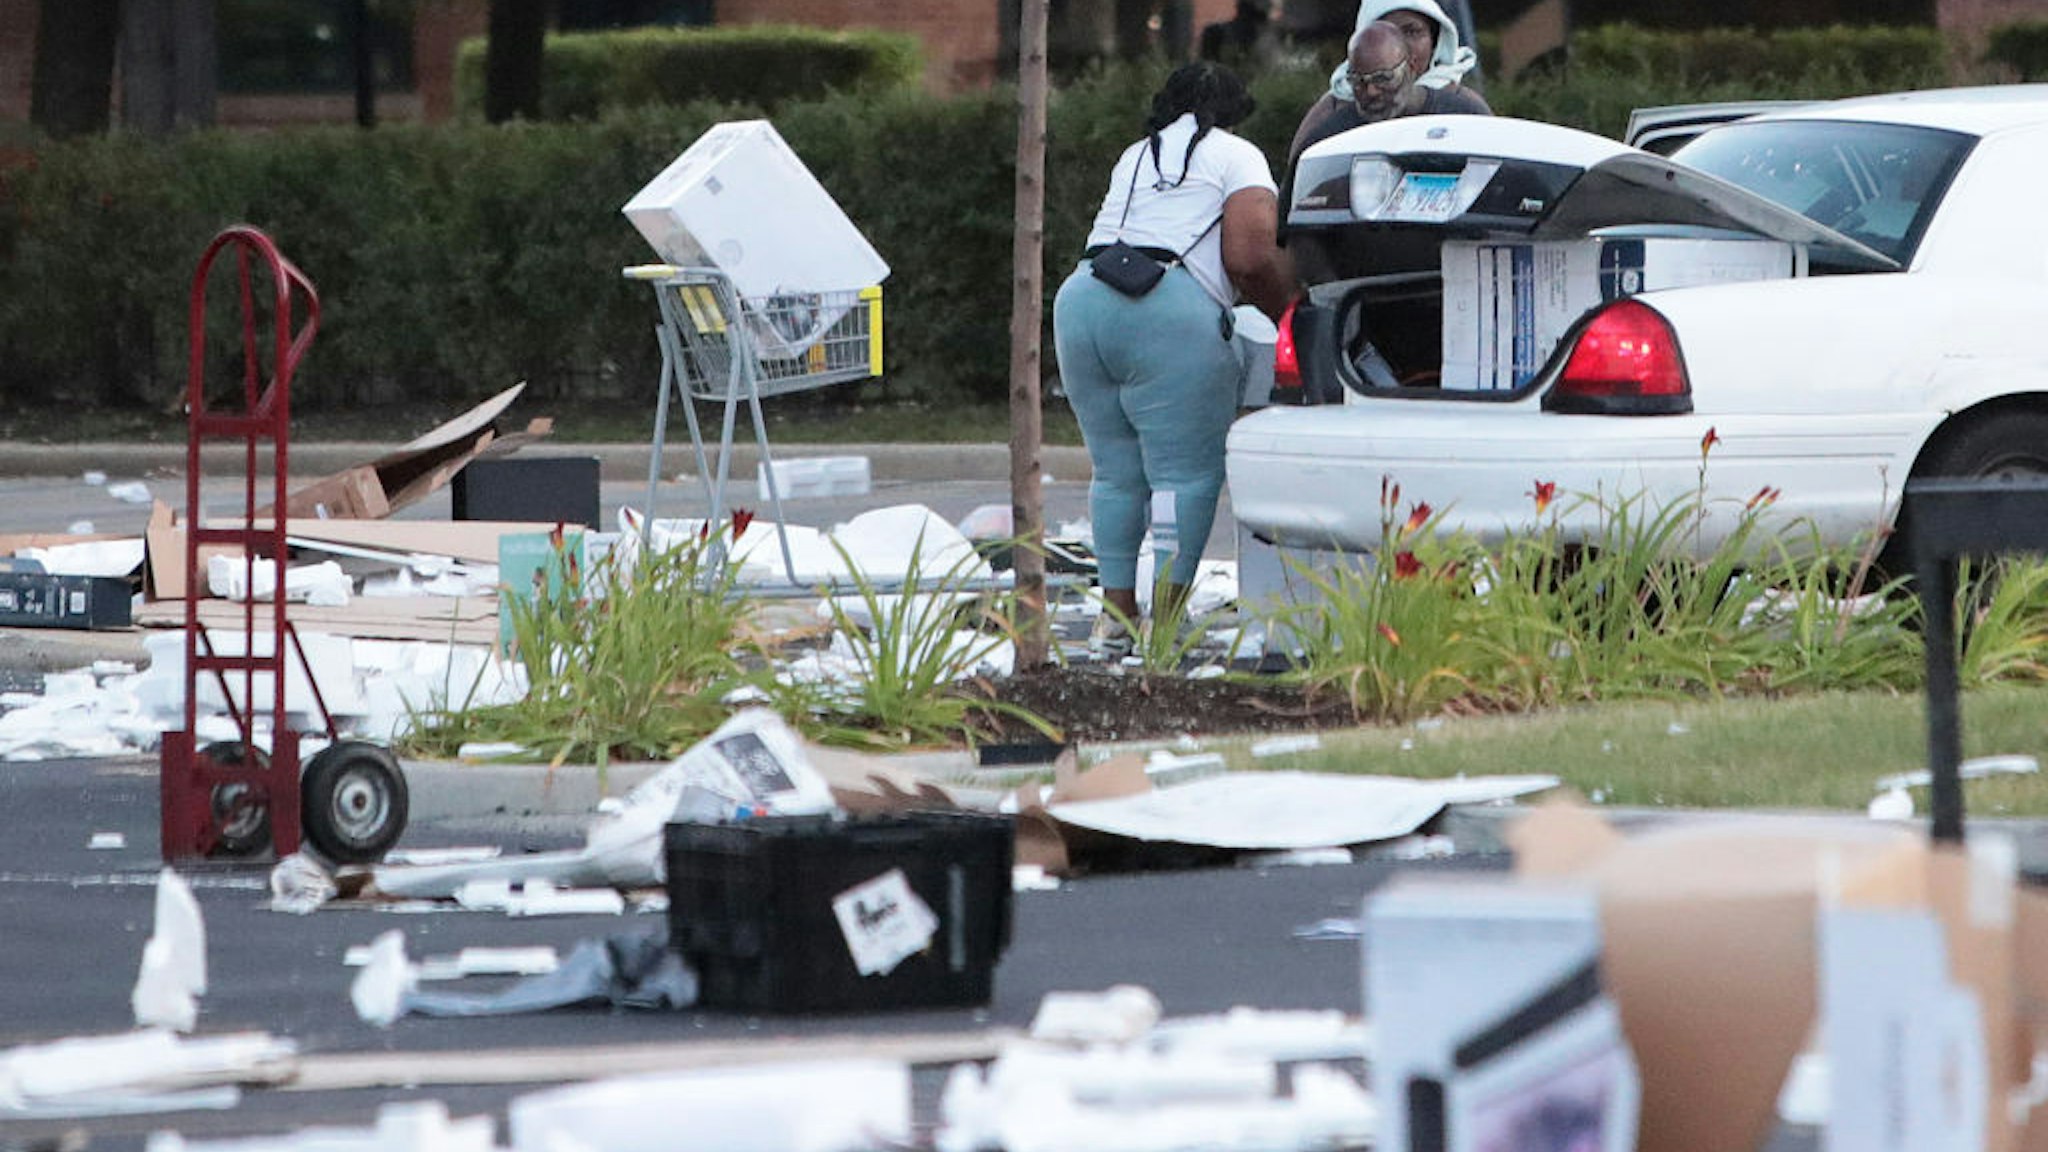 People load merchandise into a car near a looted Best Buy store after parts of the city had widespread looting and vandalism, on August 10, 2020 in Chicago, Illinois.